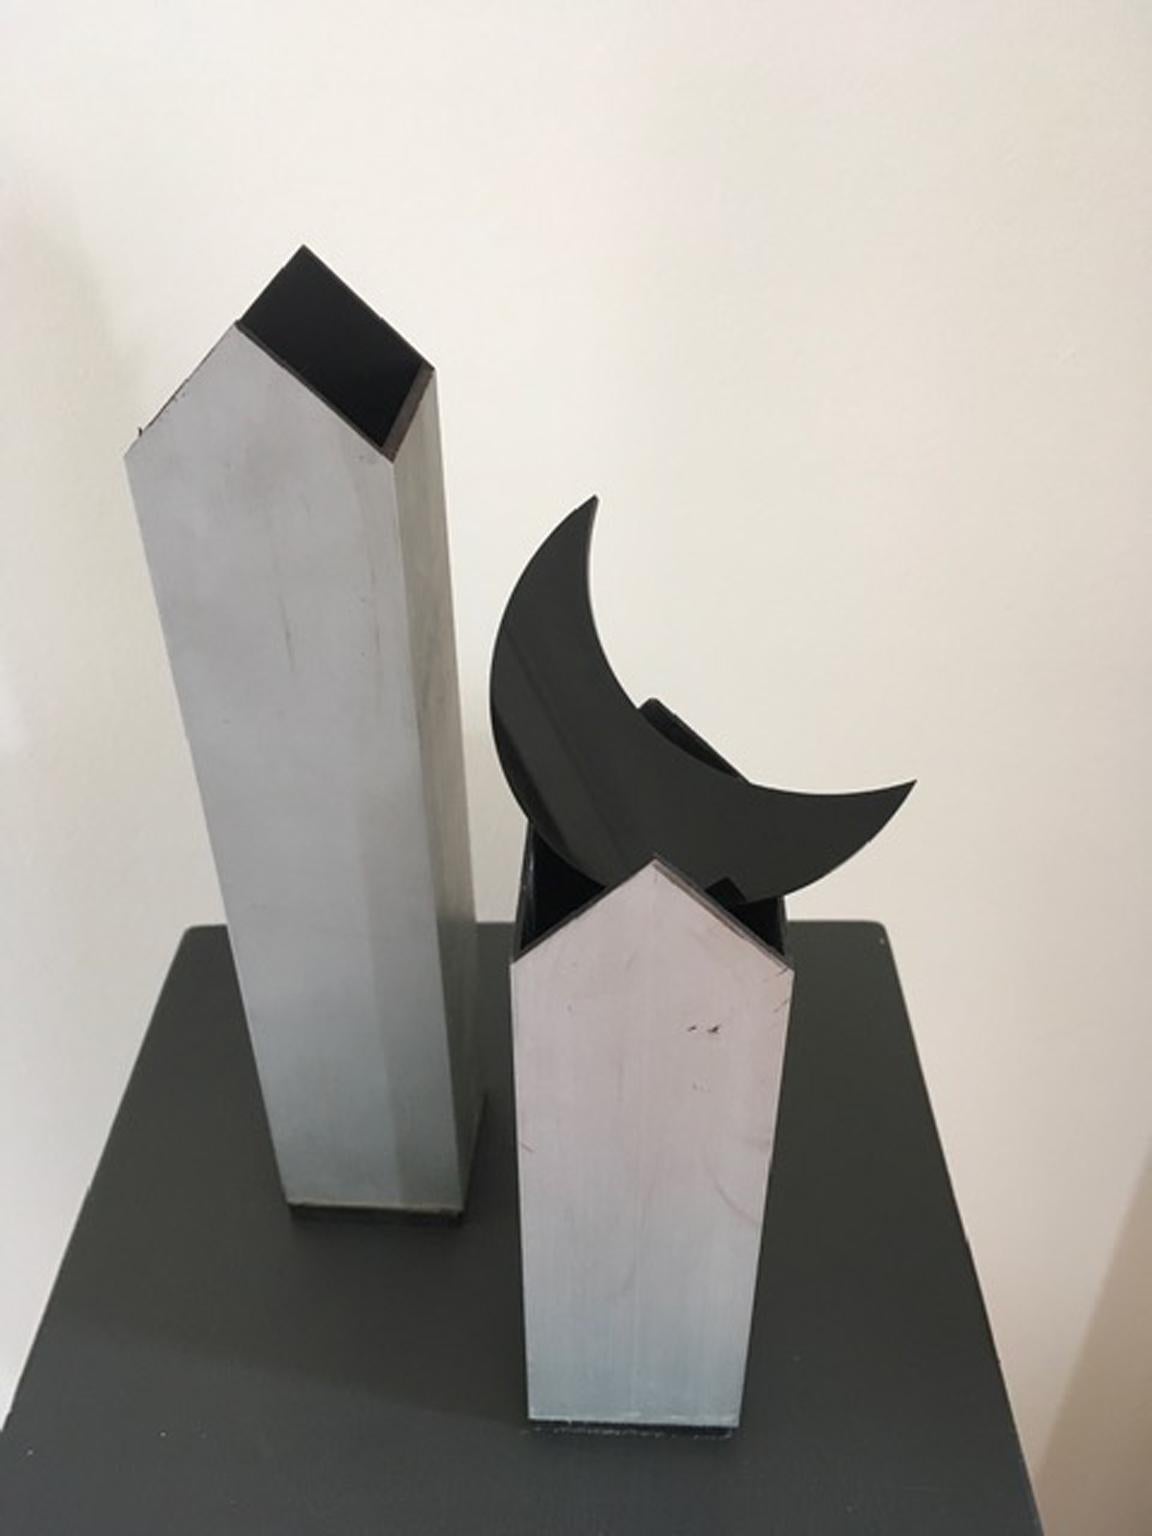 The twins in aluminium are a pair of metaphysical houses, the moon in black plexiglass is free and can be put on the top of one or other roof.
This sculpture means the freedom to create by yourselves and the choises how to be the same or to change